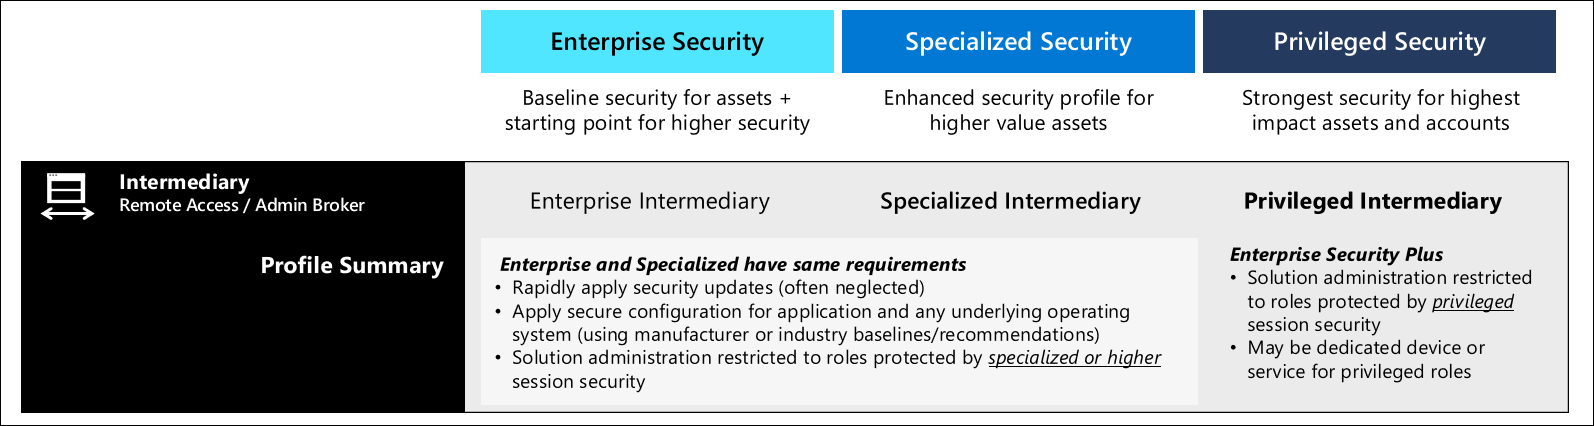 Common security controls for intermediaries